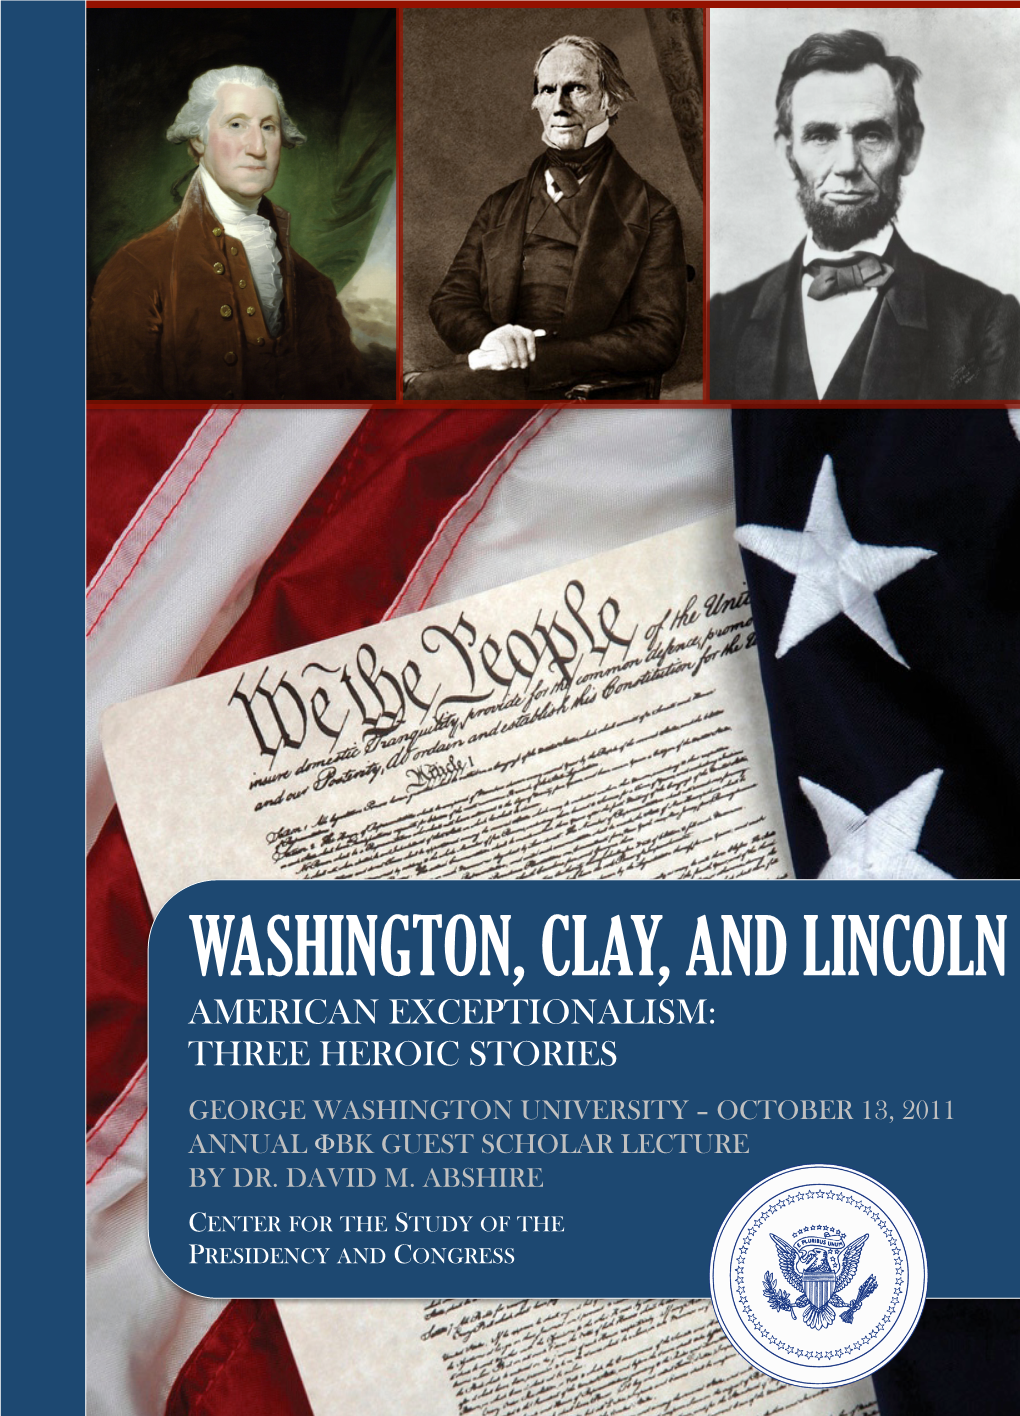 Washington, Clay, and Lincoln American Exceptionalism: Three Heroic Stories